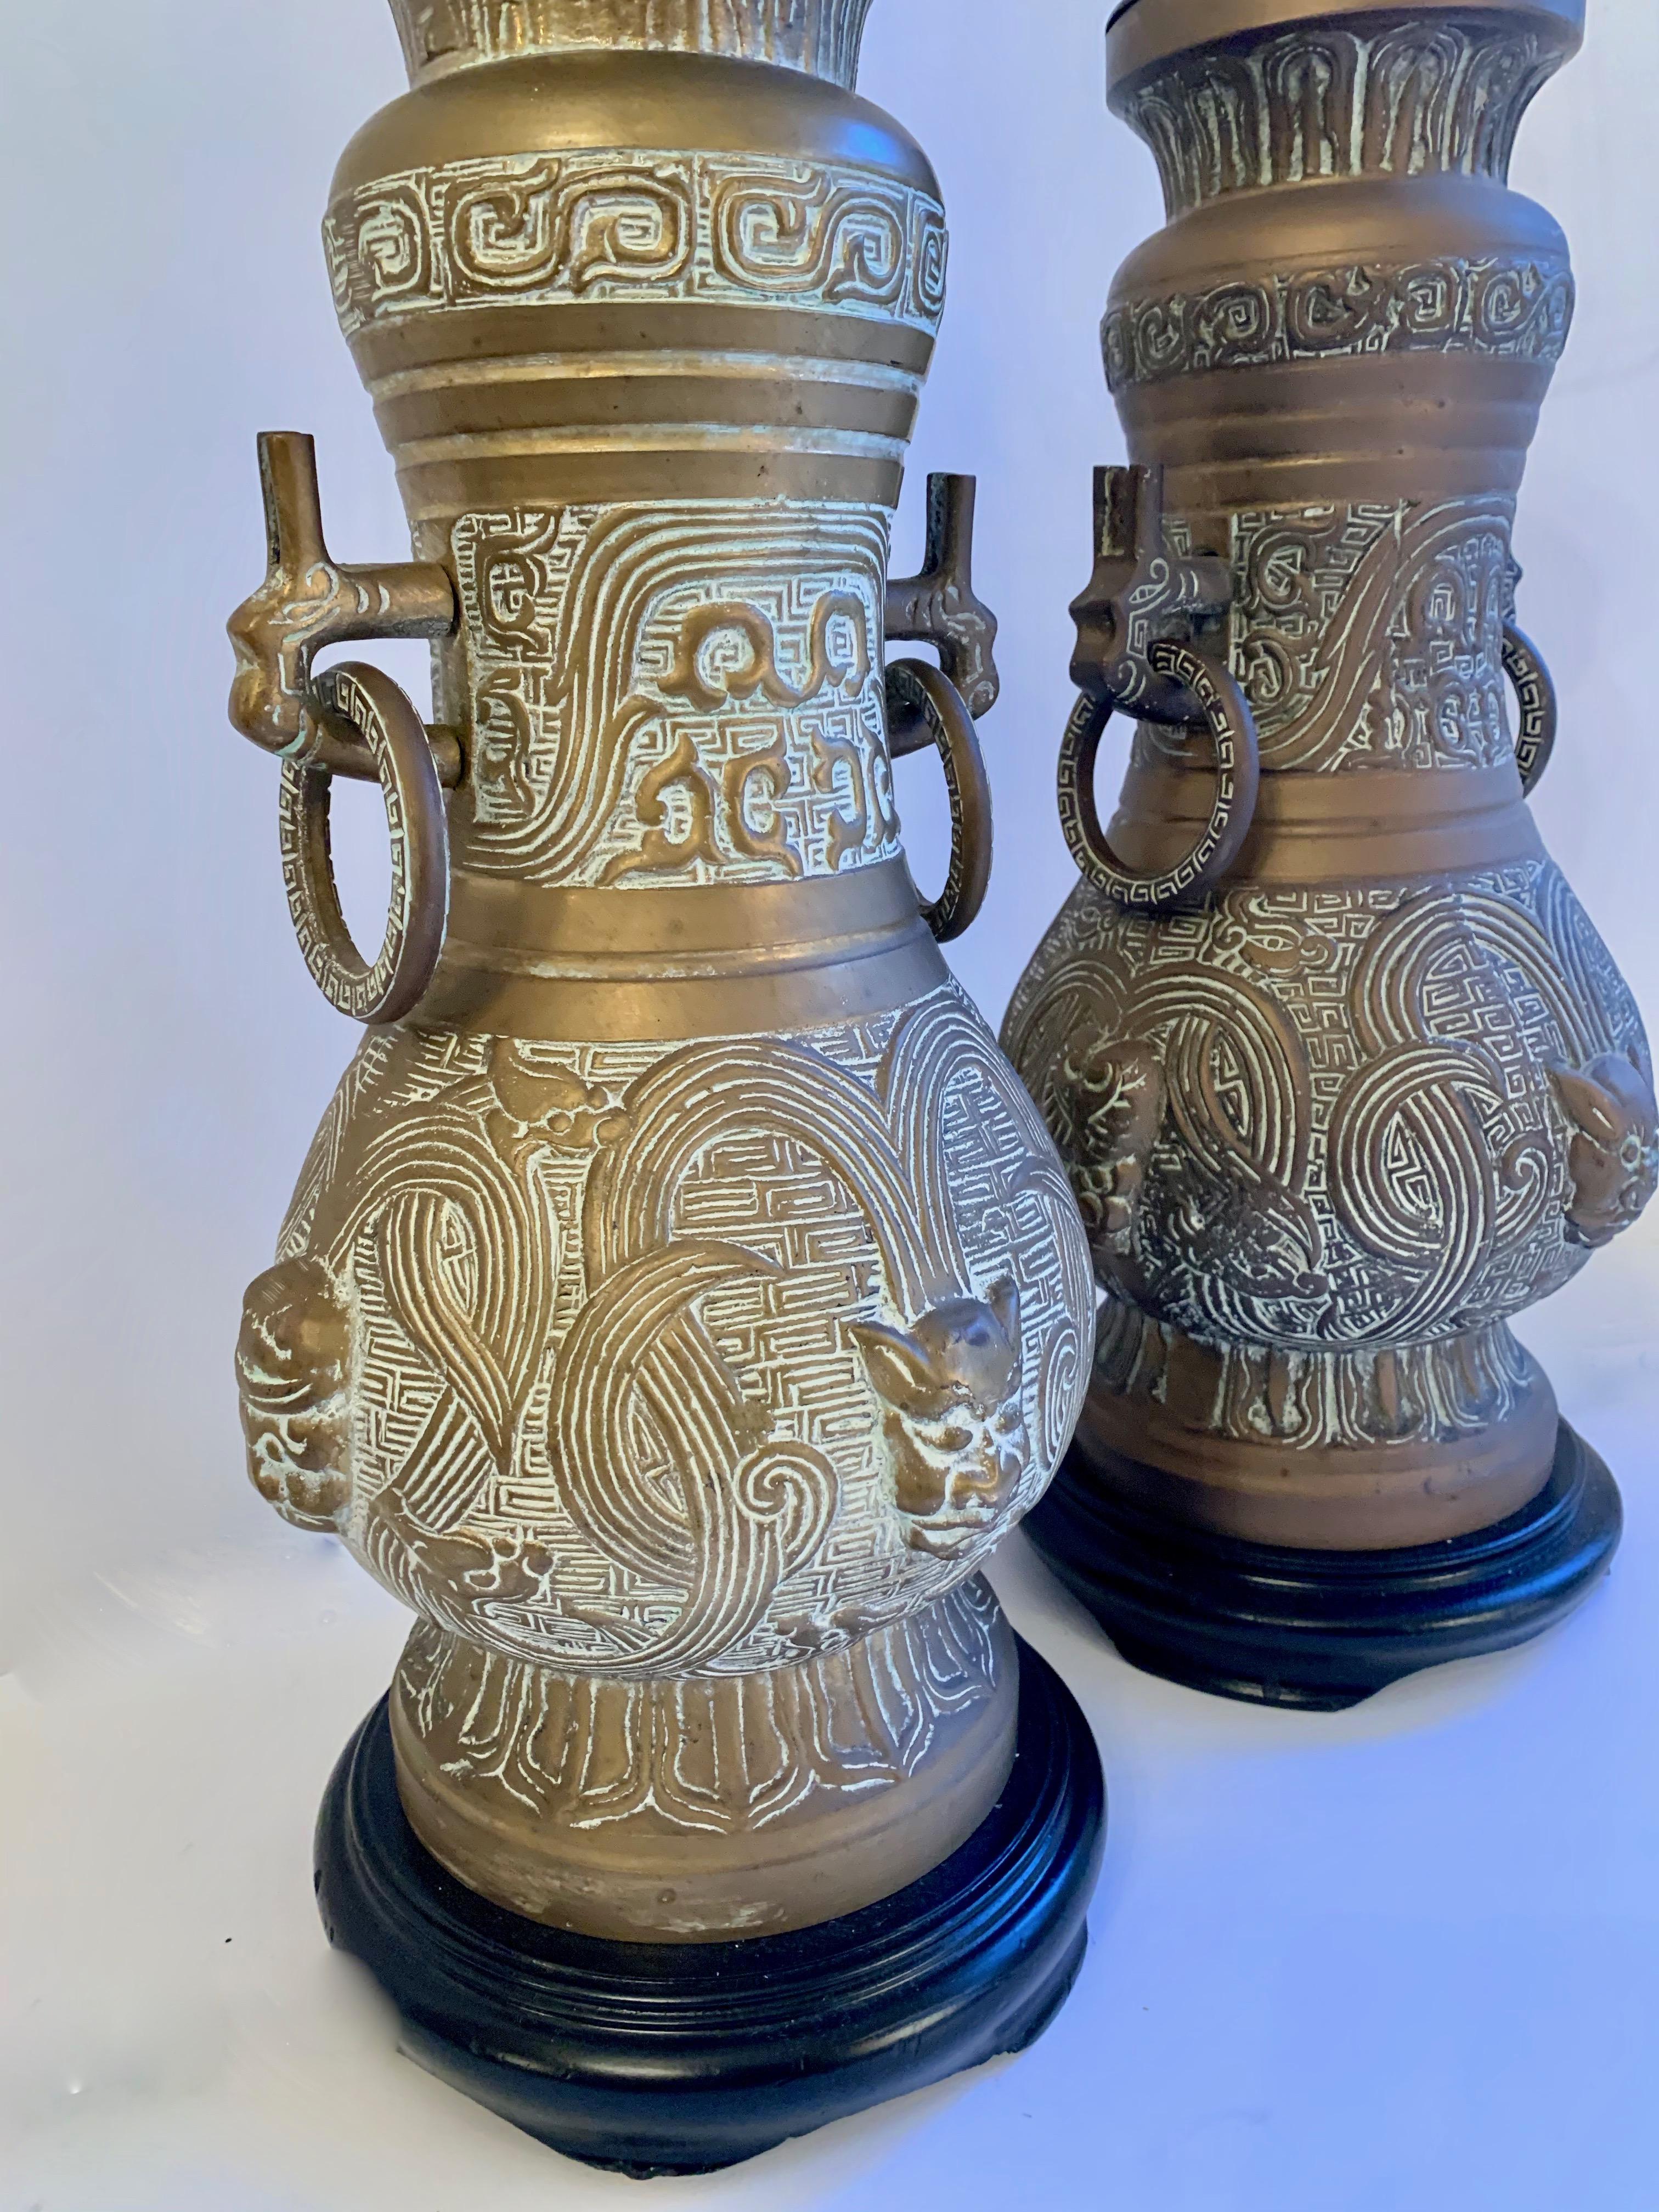 James Mont style bronze Asian urn lamps with ring handles. A wonderful pair.
Includes the black shades with gold lining - we are of course glad to create new shades using COM as well. 

The bases and caps of wood have been freshly lacquered.